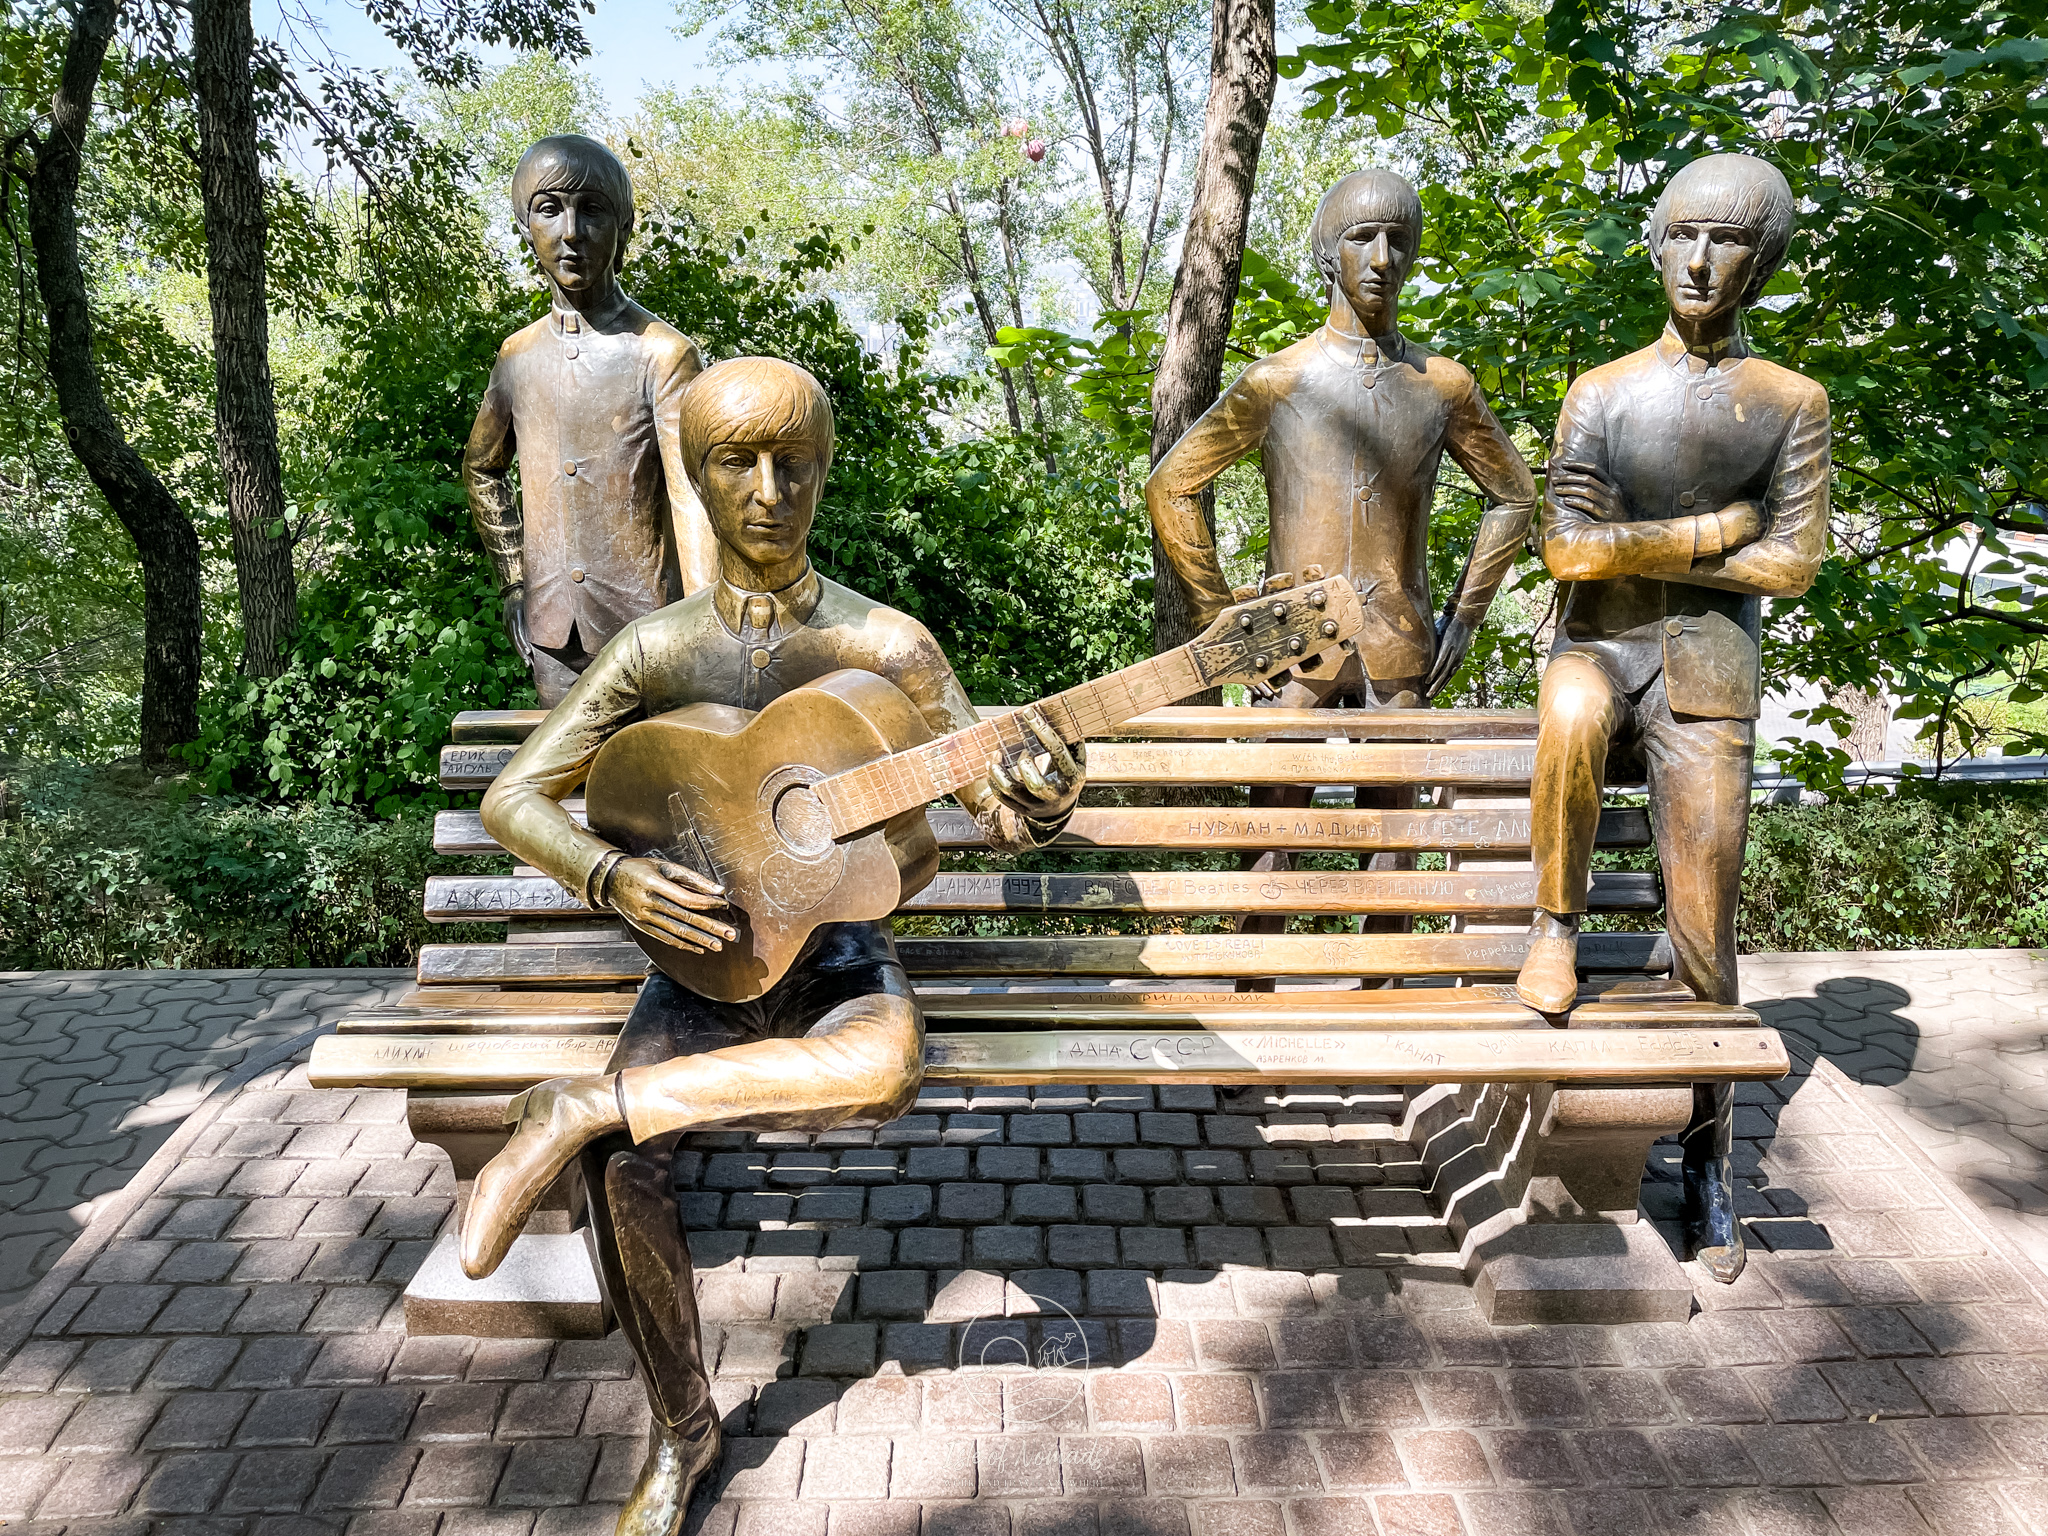 On Kok Tobe, you will find an amusement park and a Beatles statue